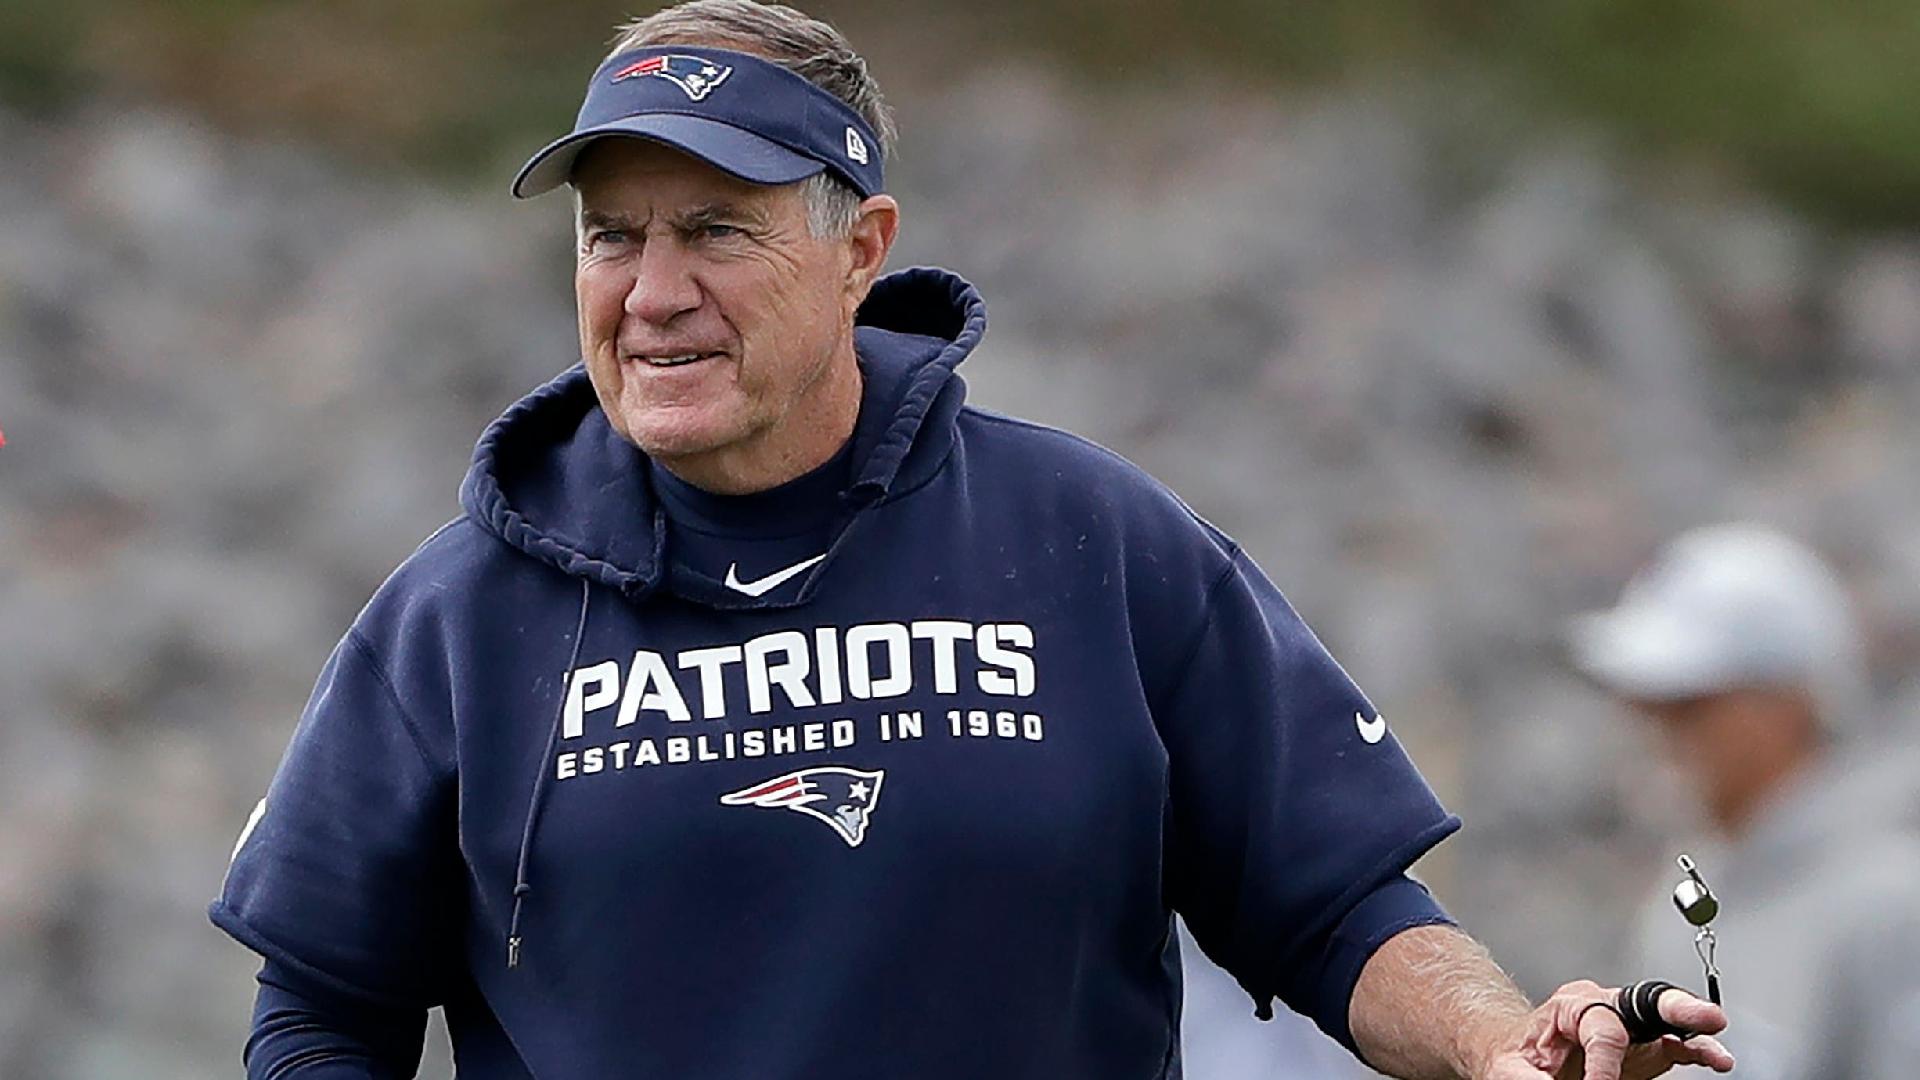 Bill Belichick leaves Patriots after 24 seasons | beIN SPORTS